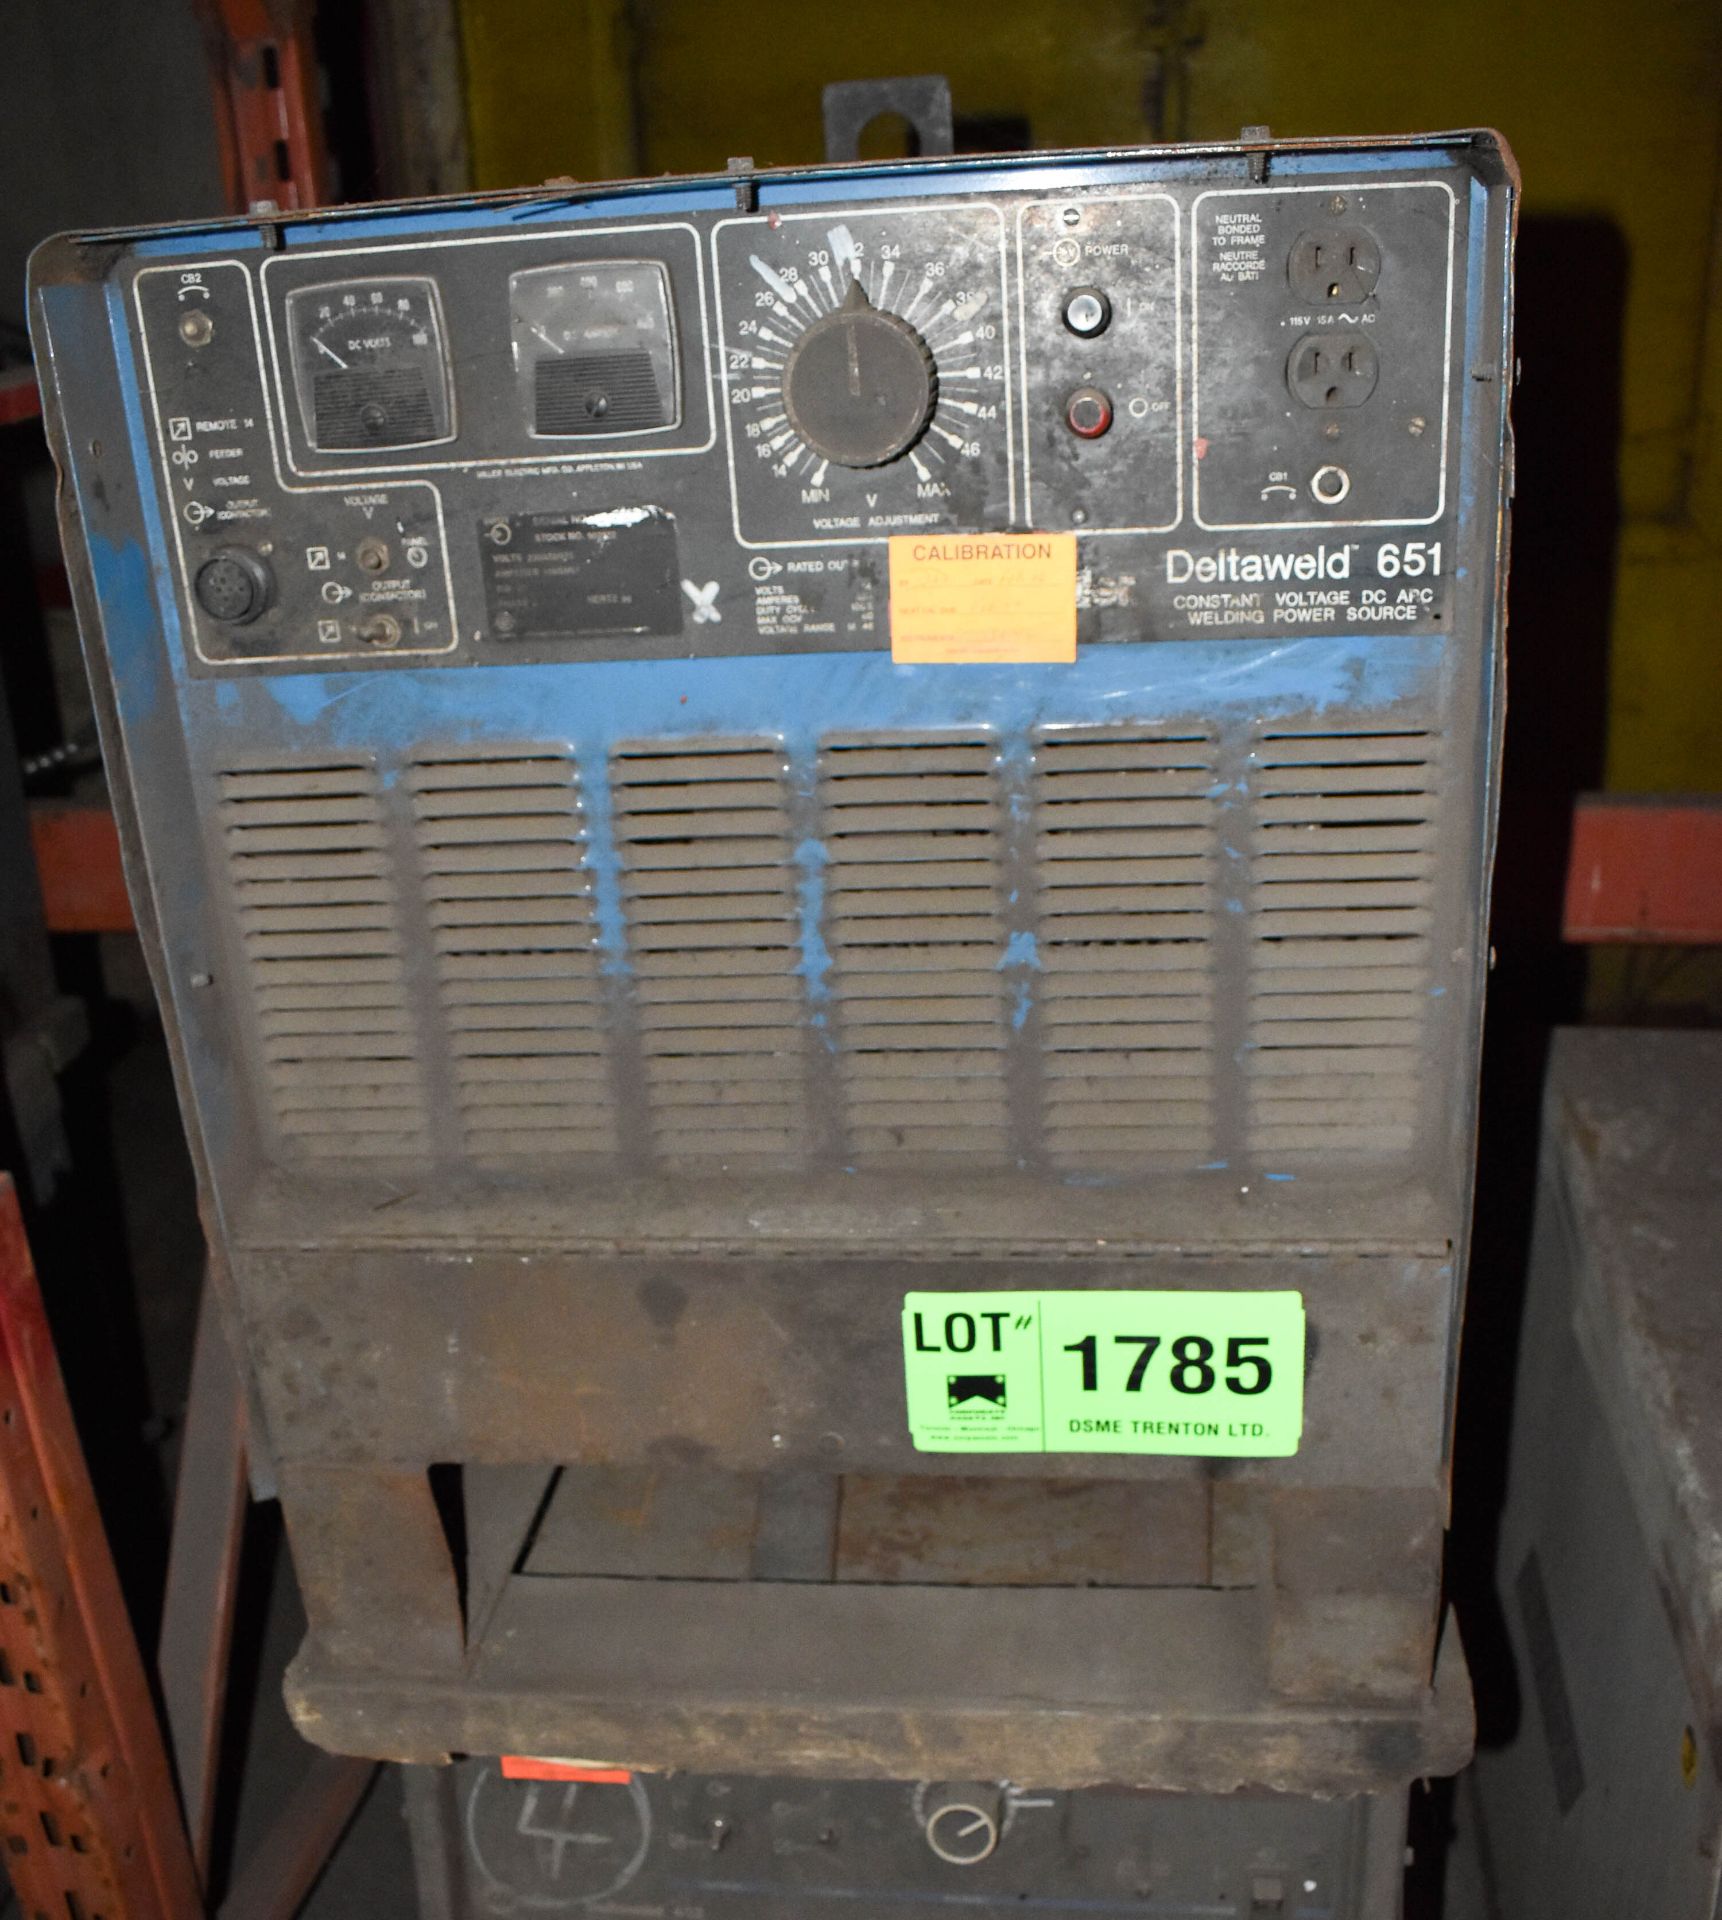 MILLER DELTAWELD 651 WELDING POWER SOURCE [RIGGING FEE FOR LOT# 1785 - $40 USD +PLUS TAXES]